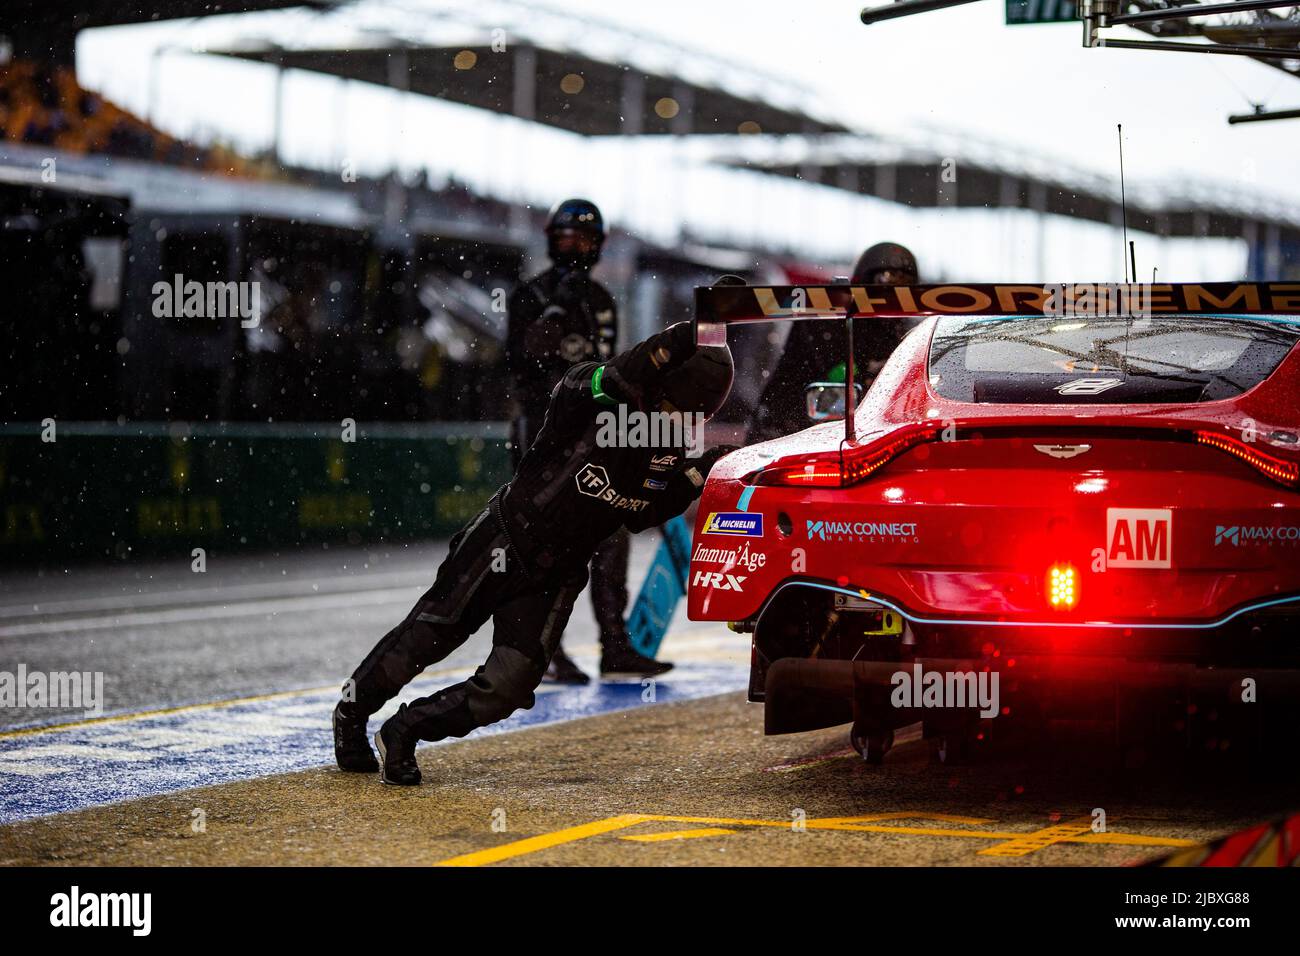 FIA World Endurance Championship on X: A season for the ages